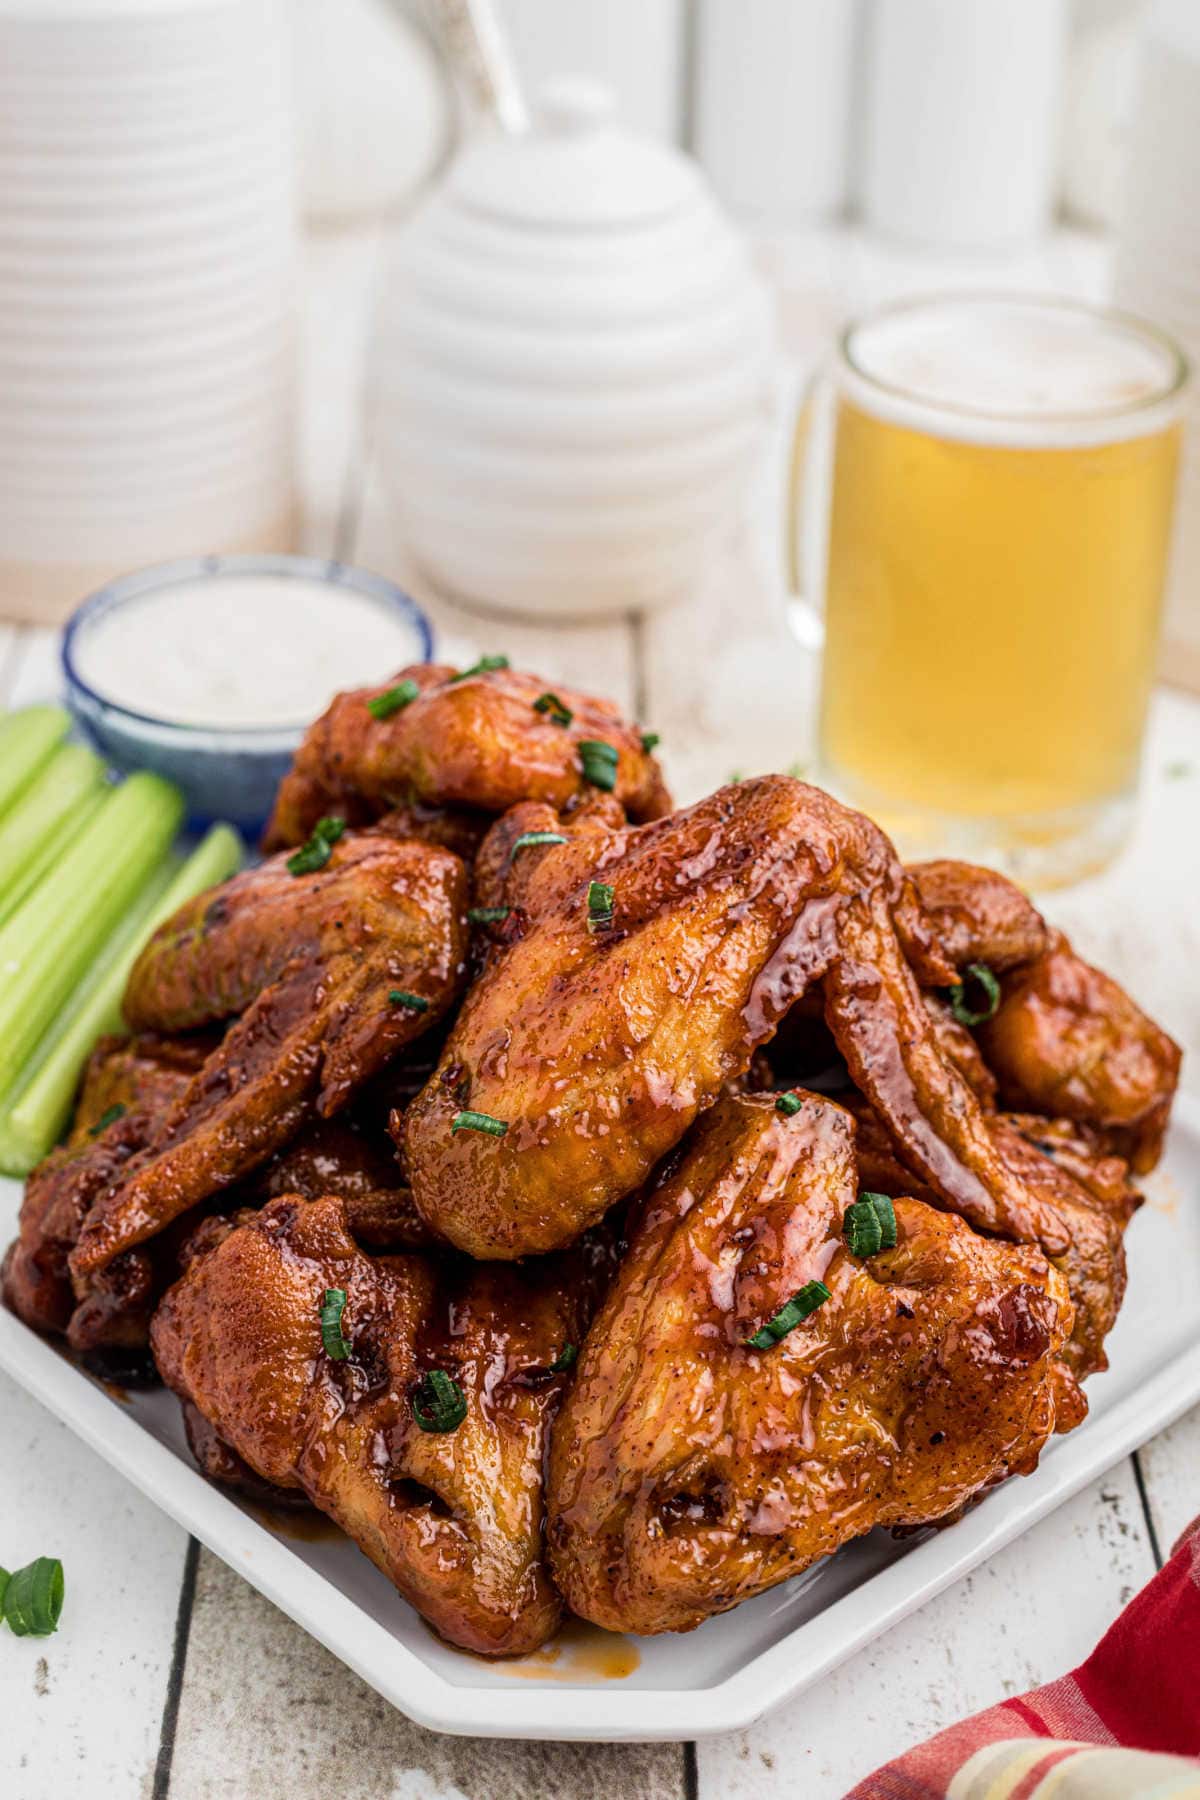 A platter of wings on a table with a glass of beer.